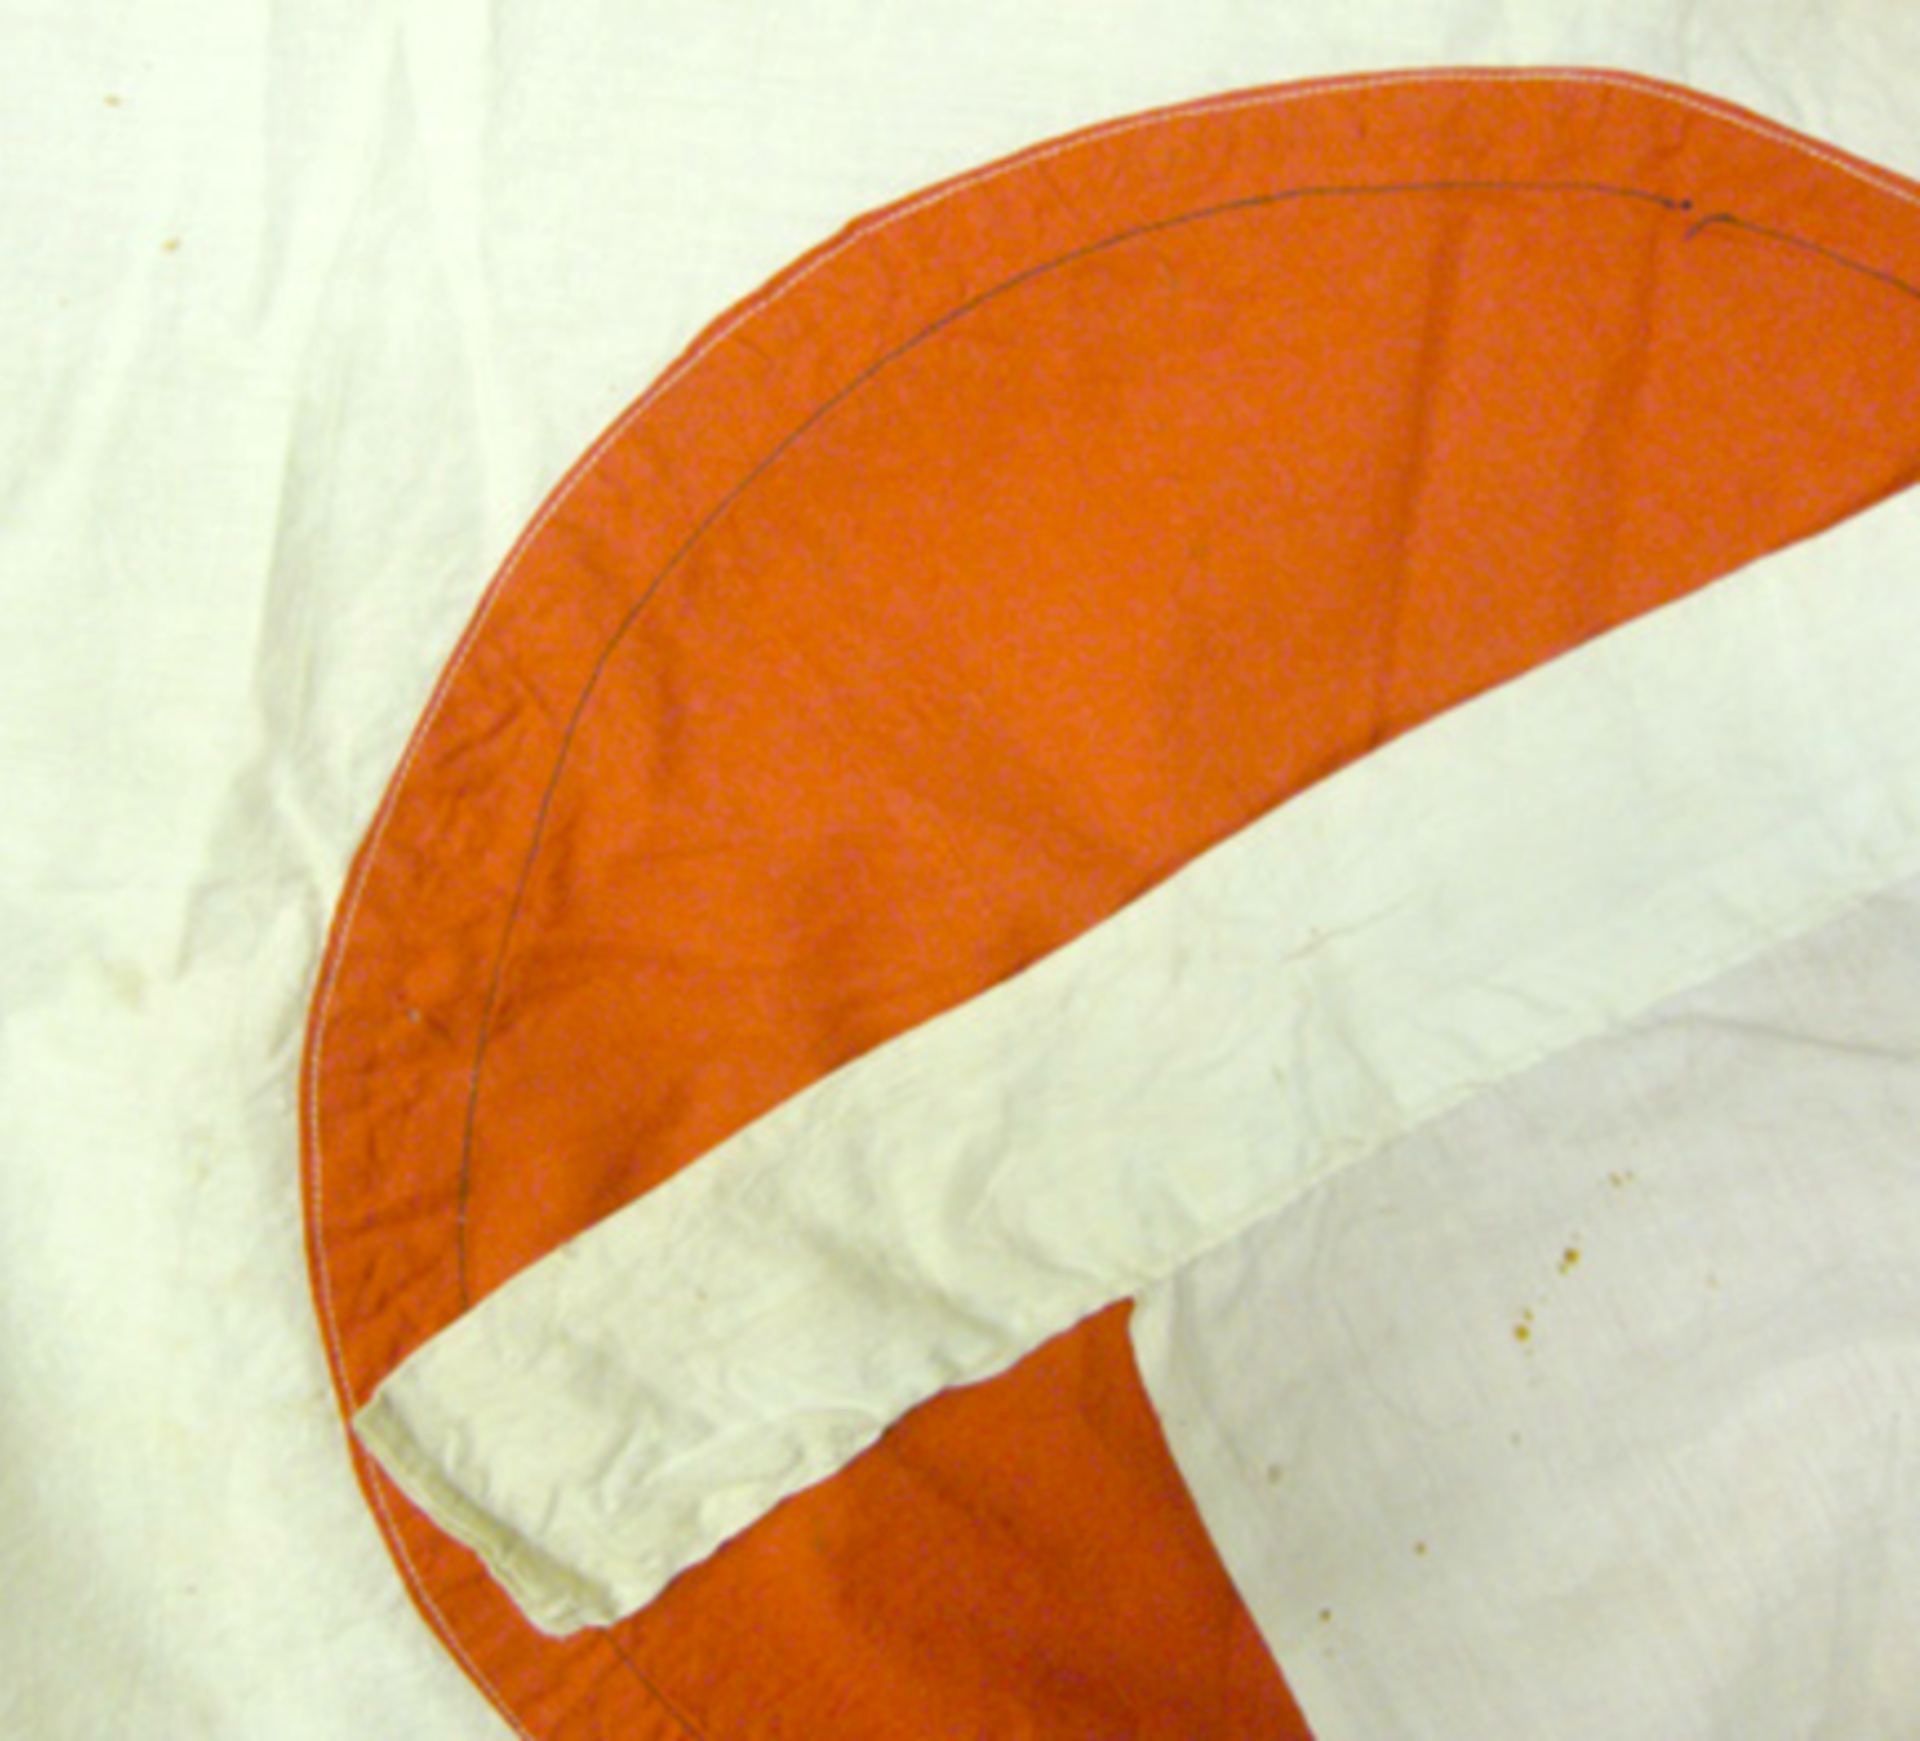 Captured, WW2 Japanese Battle Flag / Ensign Of The Empire of Japan - Image 3 of 3